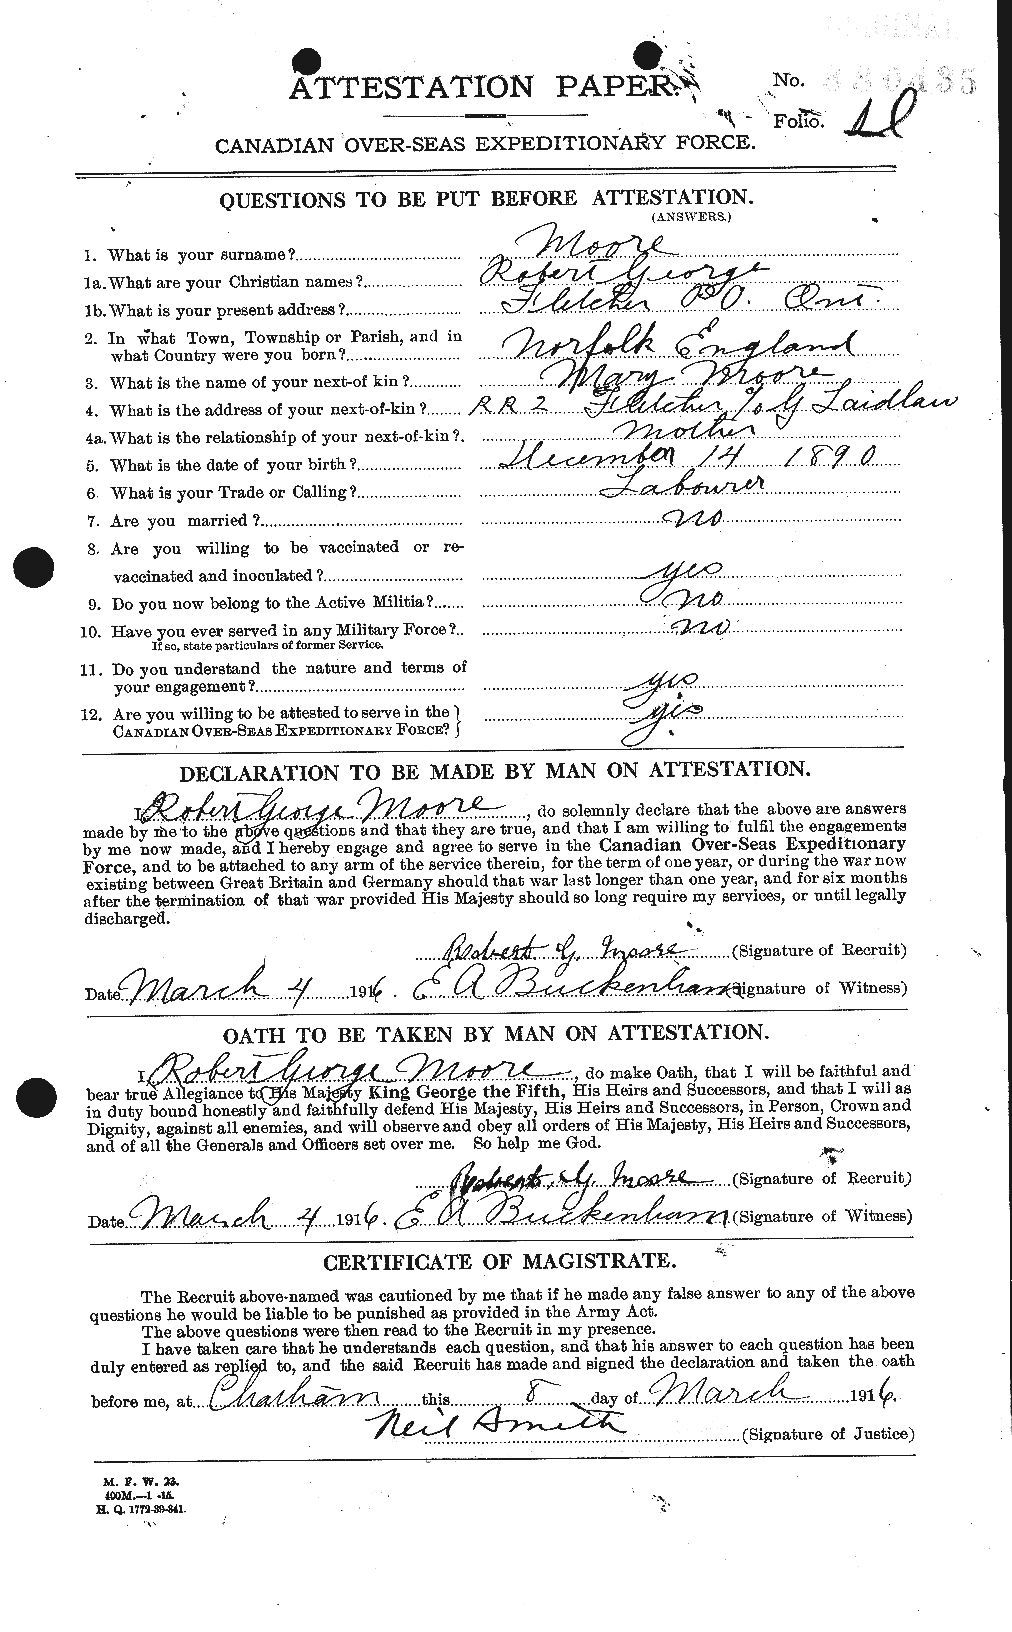 Personnel Records of the First World War - CEF 503566a